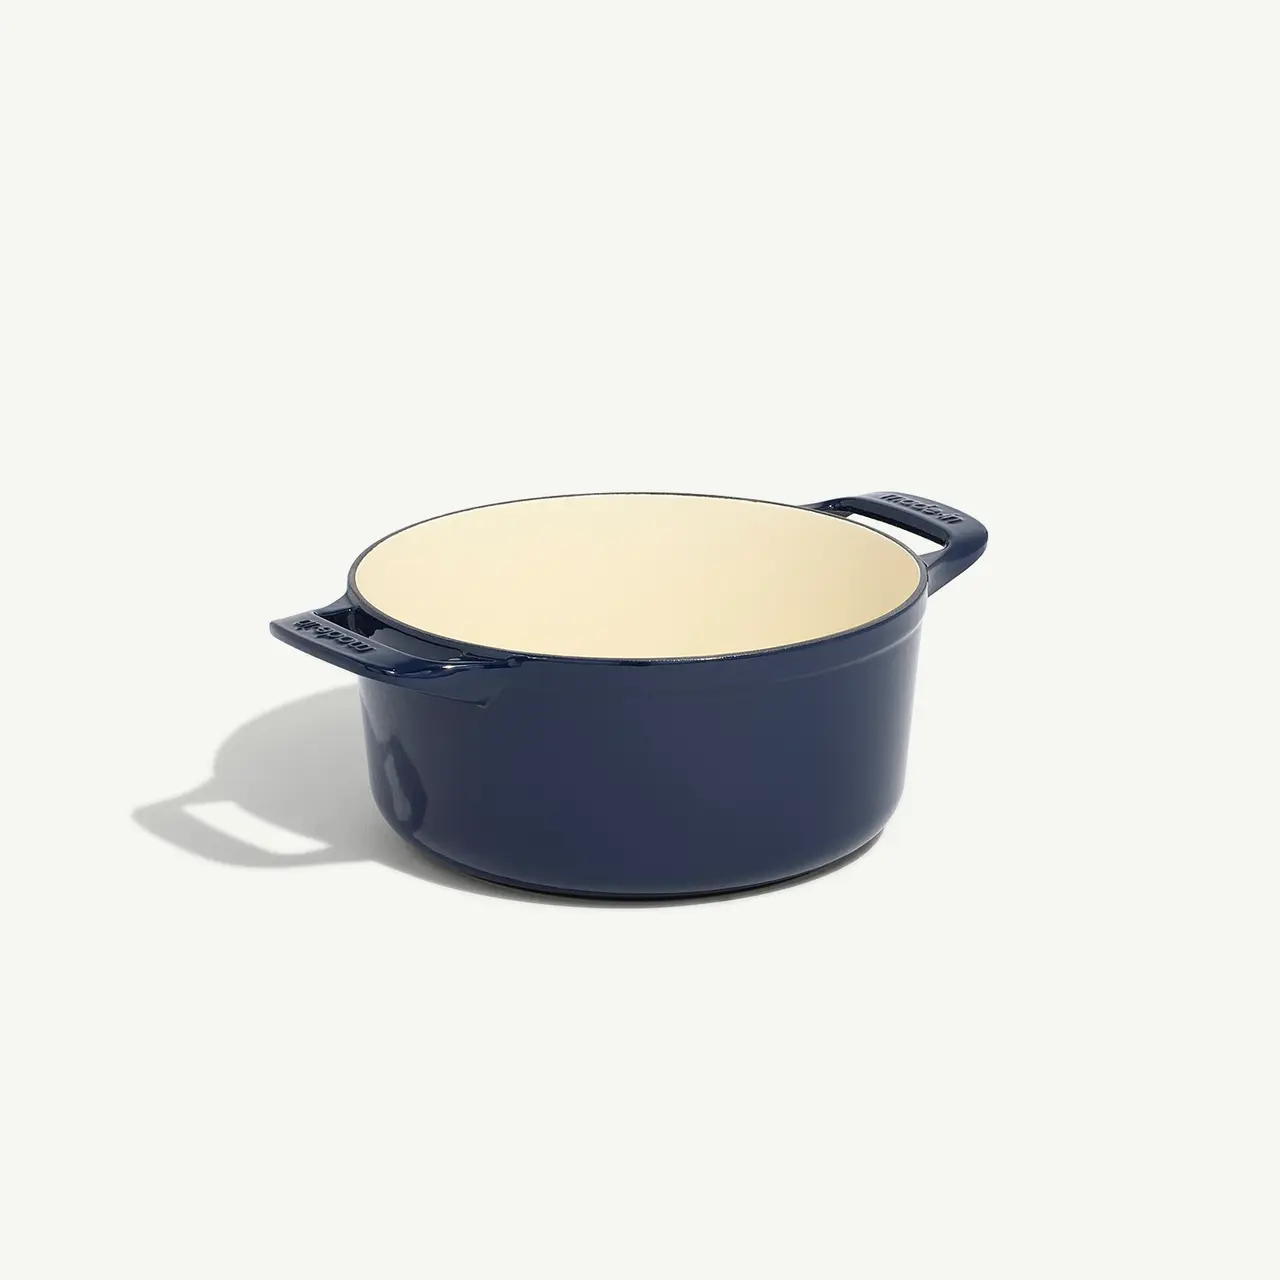 A navy blue enameled cast iron Dutch oven sits on a light background.